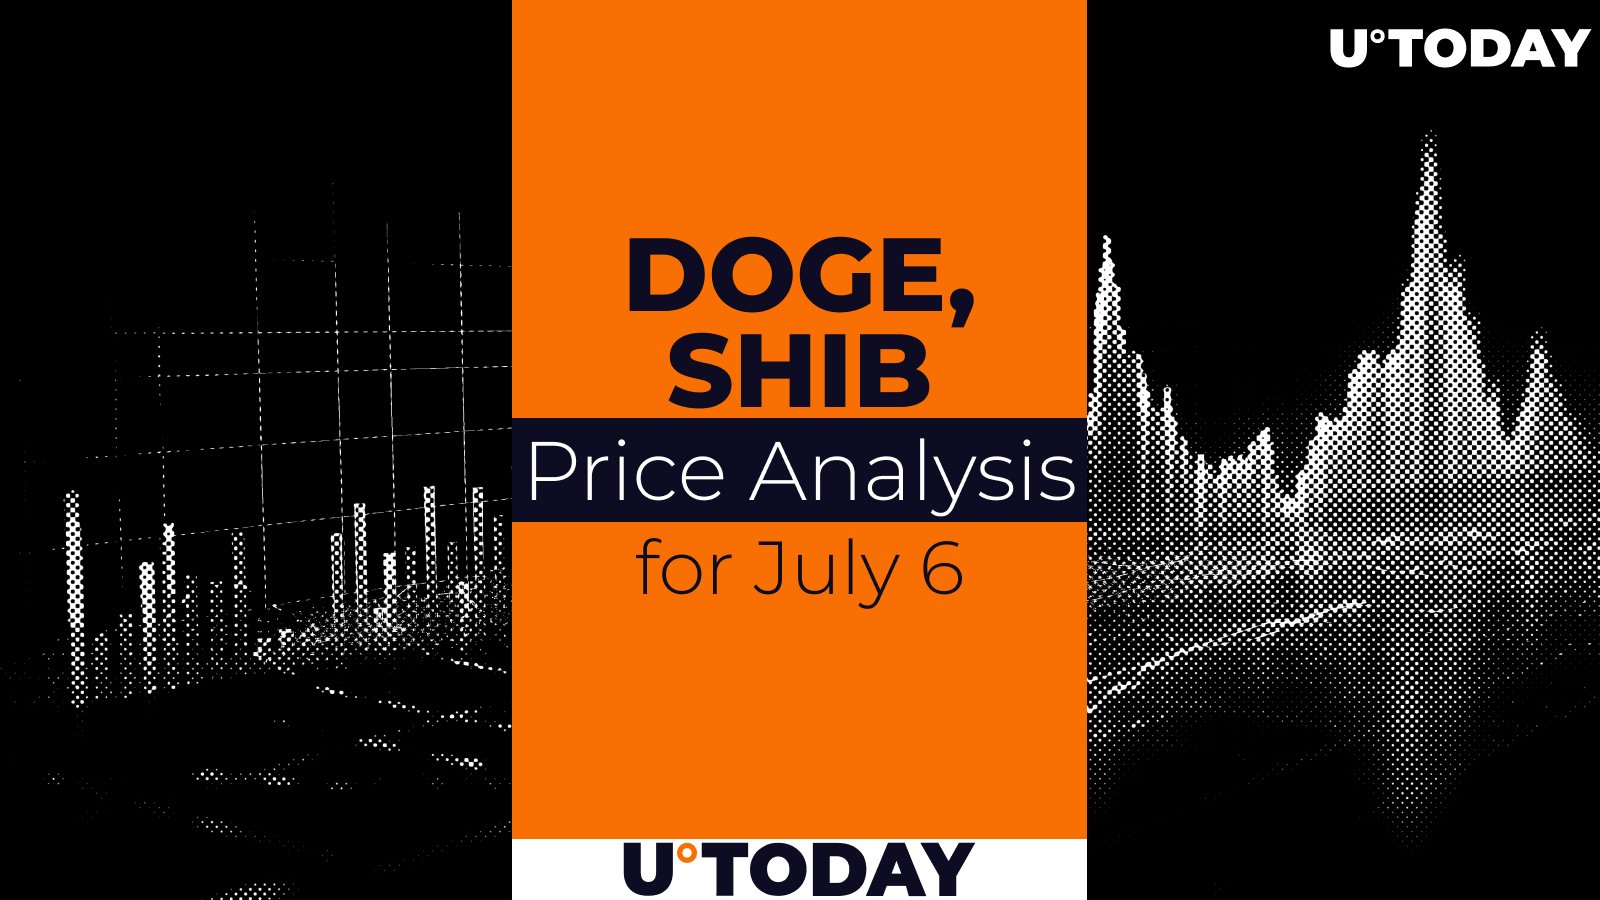 DOGE and SHIB Price Prediction for July 6